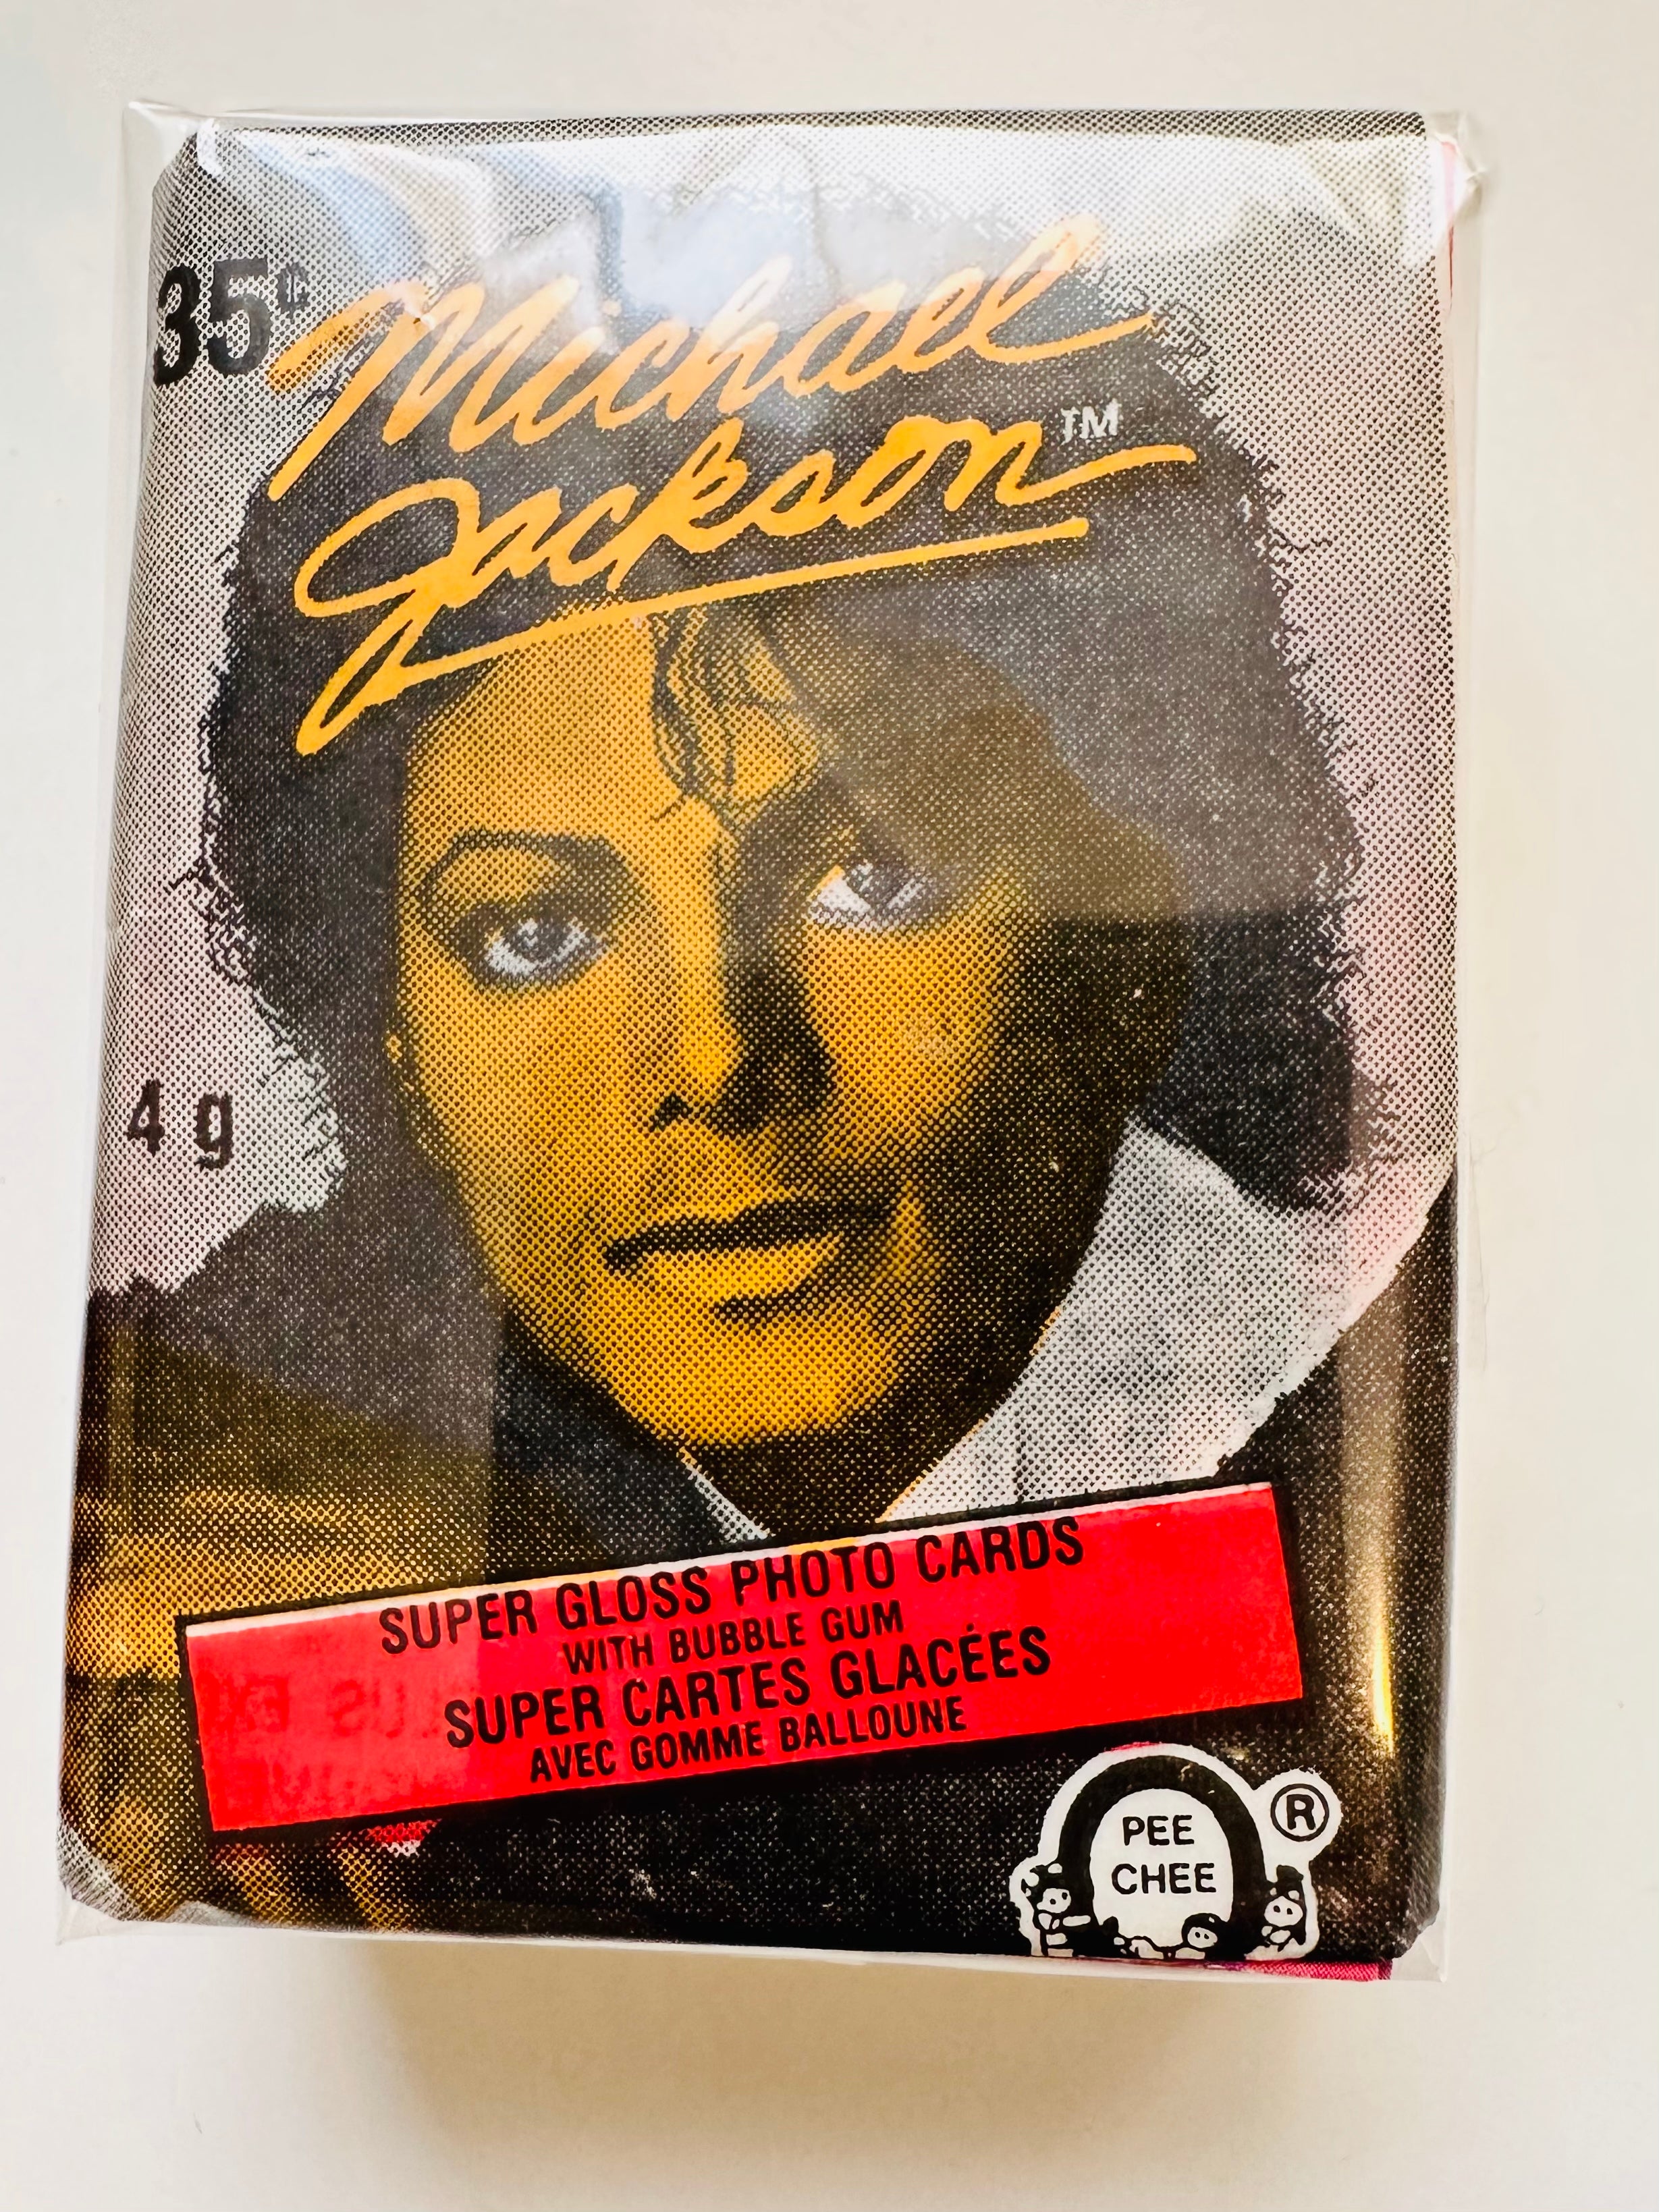 Michael Jackson Opc Canadian version rare cards set with wrapper 1984